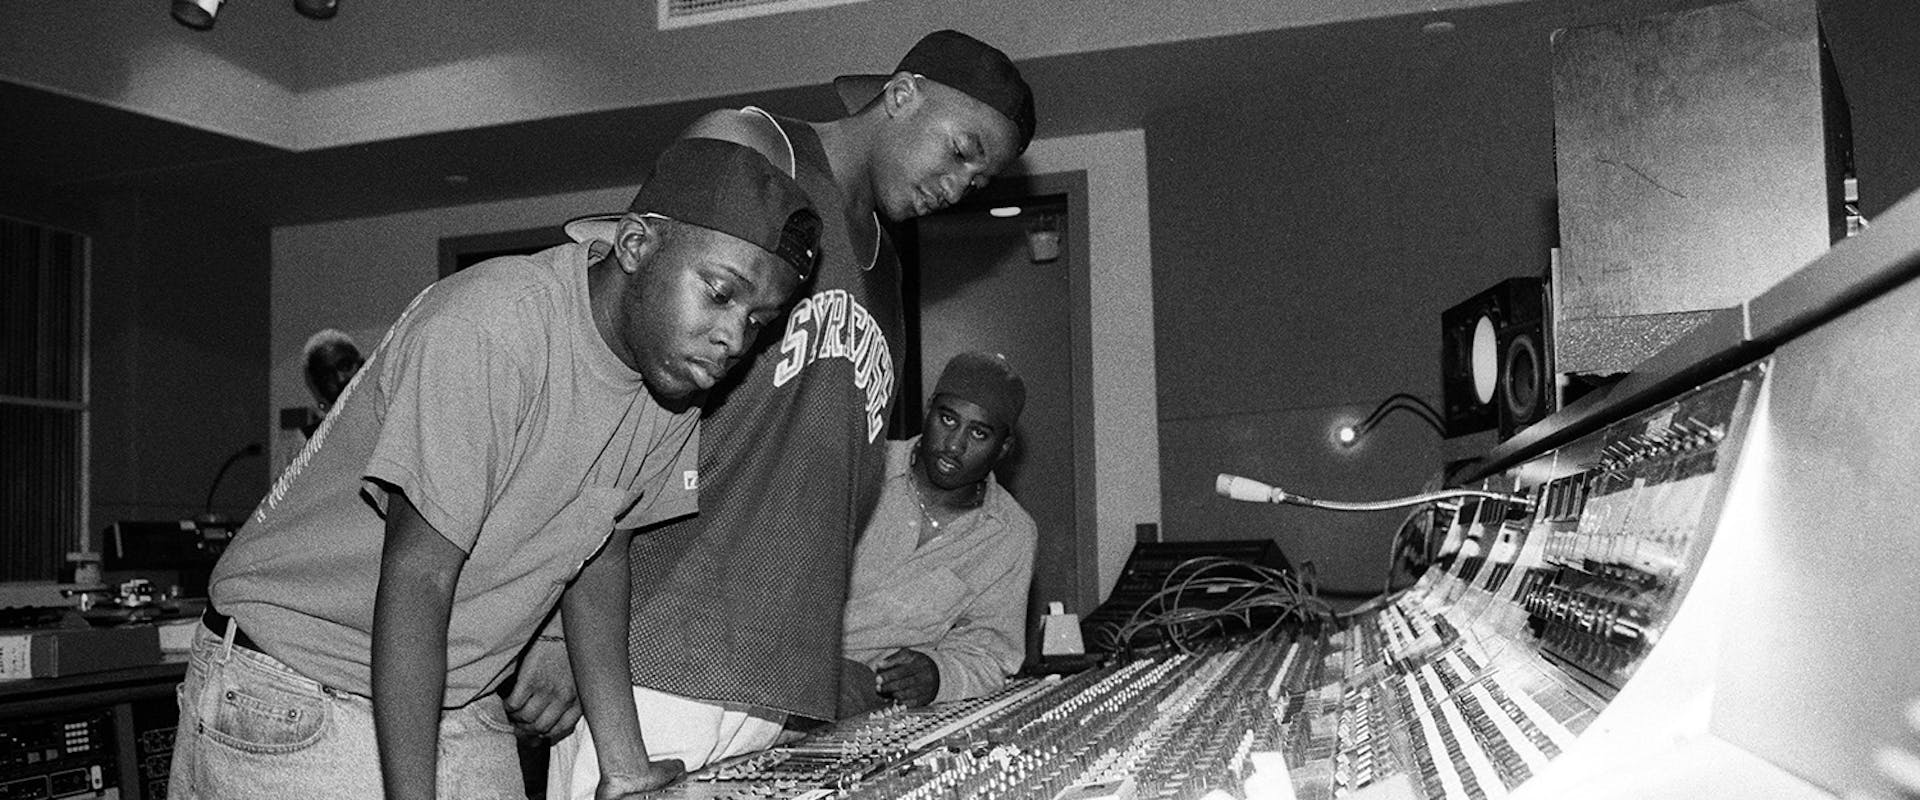 Phife, Q-Tip and Ali Shaheed Muhammad of A Tribe Called Quest in the recording studio in New York City on September 10, 1991. 